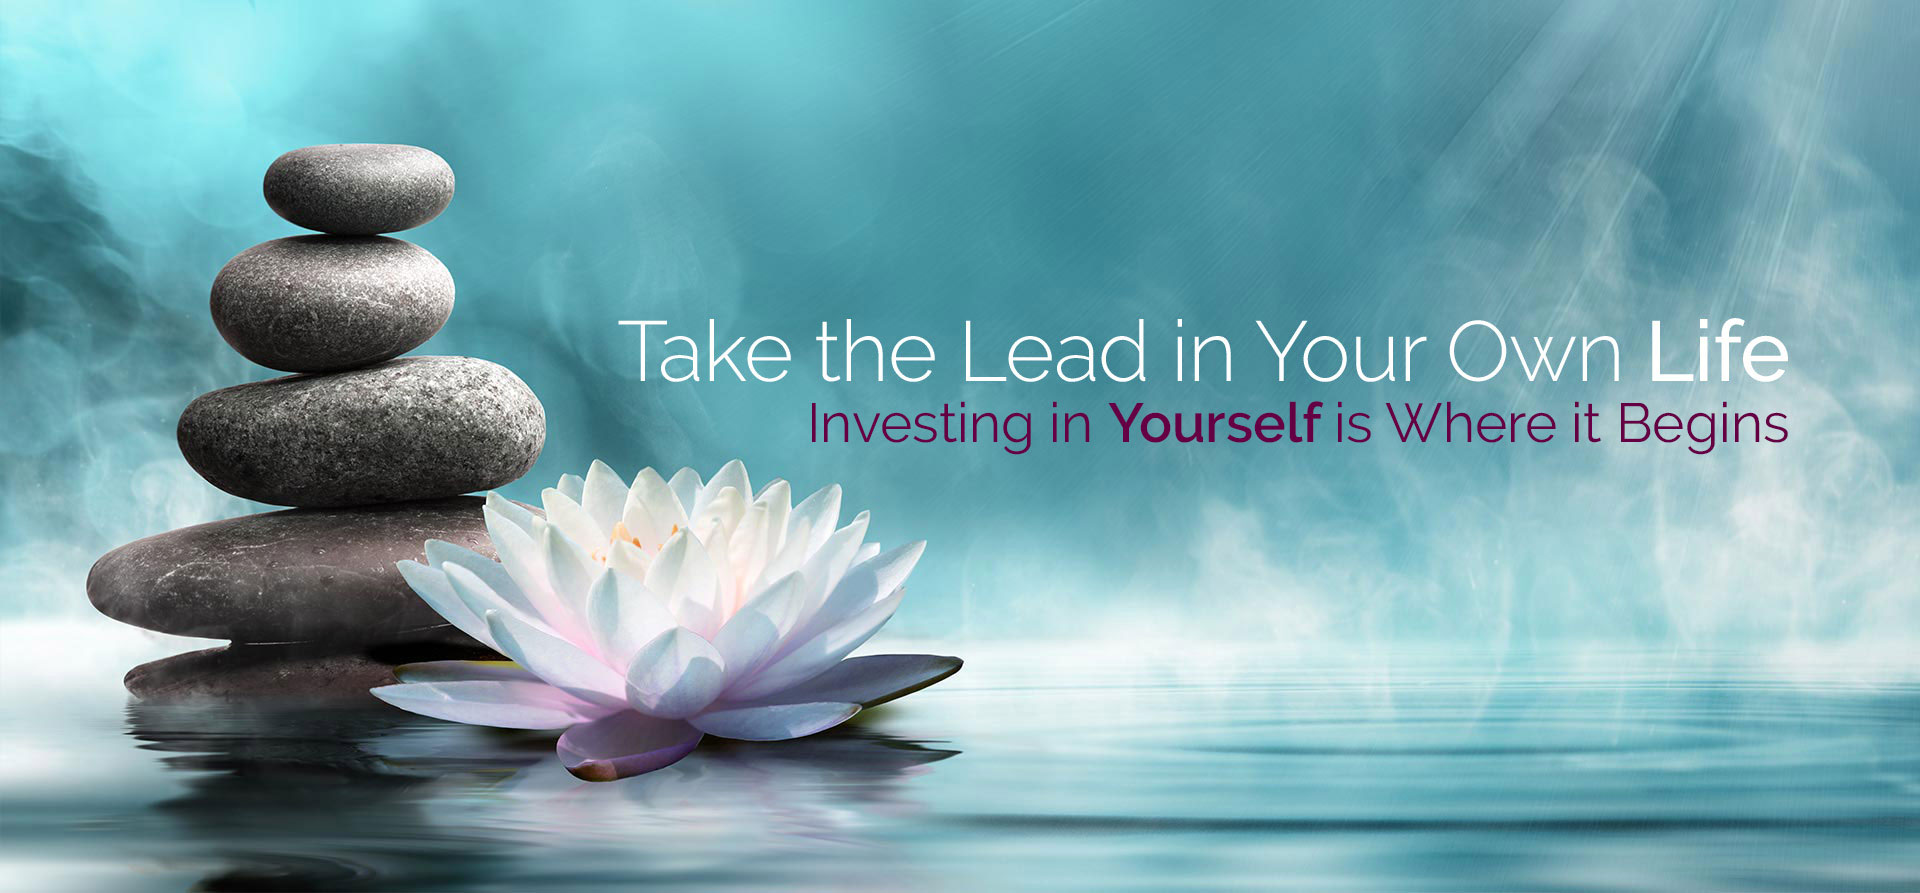 Take the lead in your own life. Investing in yourself is where it begins.